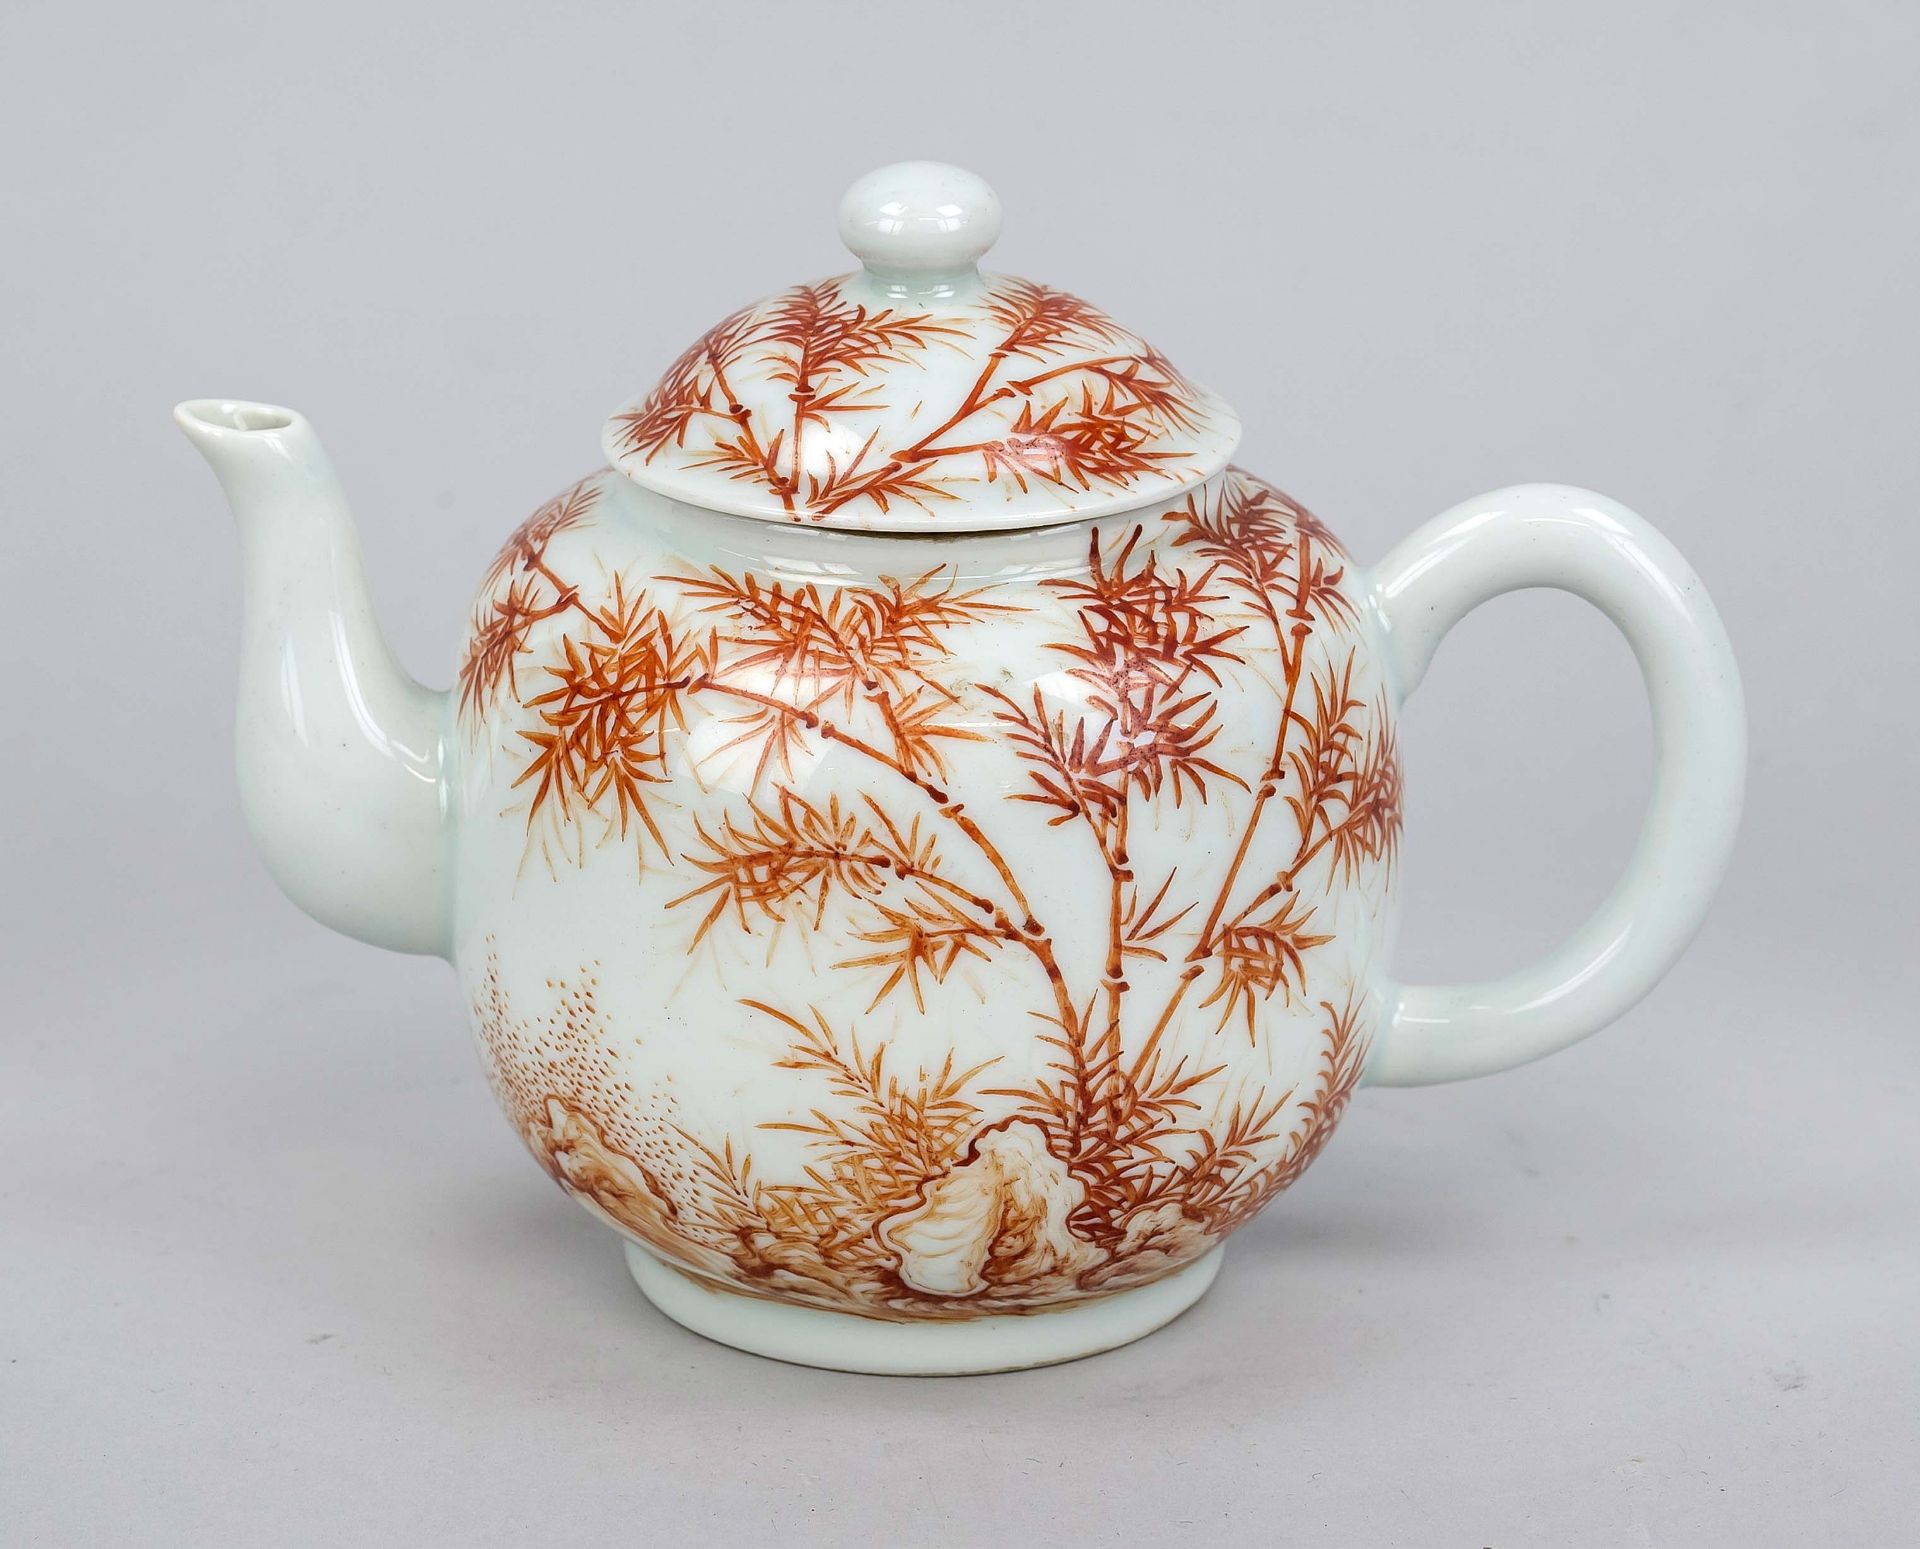 Teapot, probably China 20th century, decorated on all sides and on the lid in iron-red with bamboo